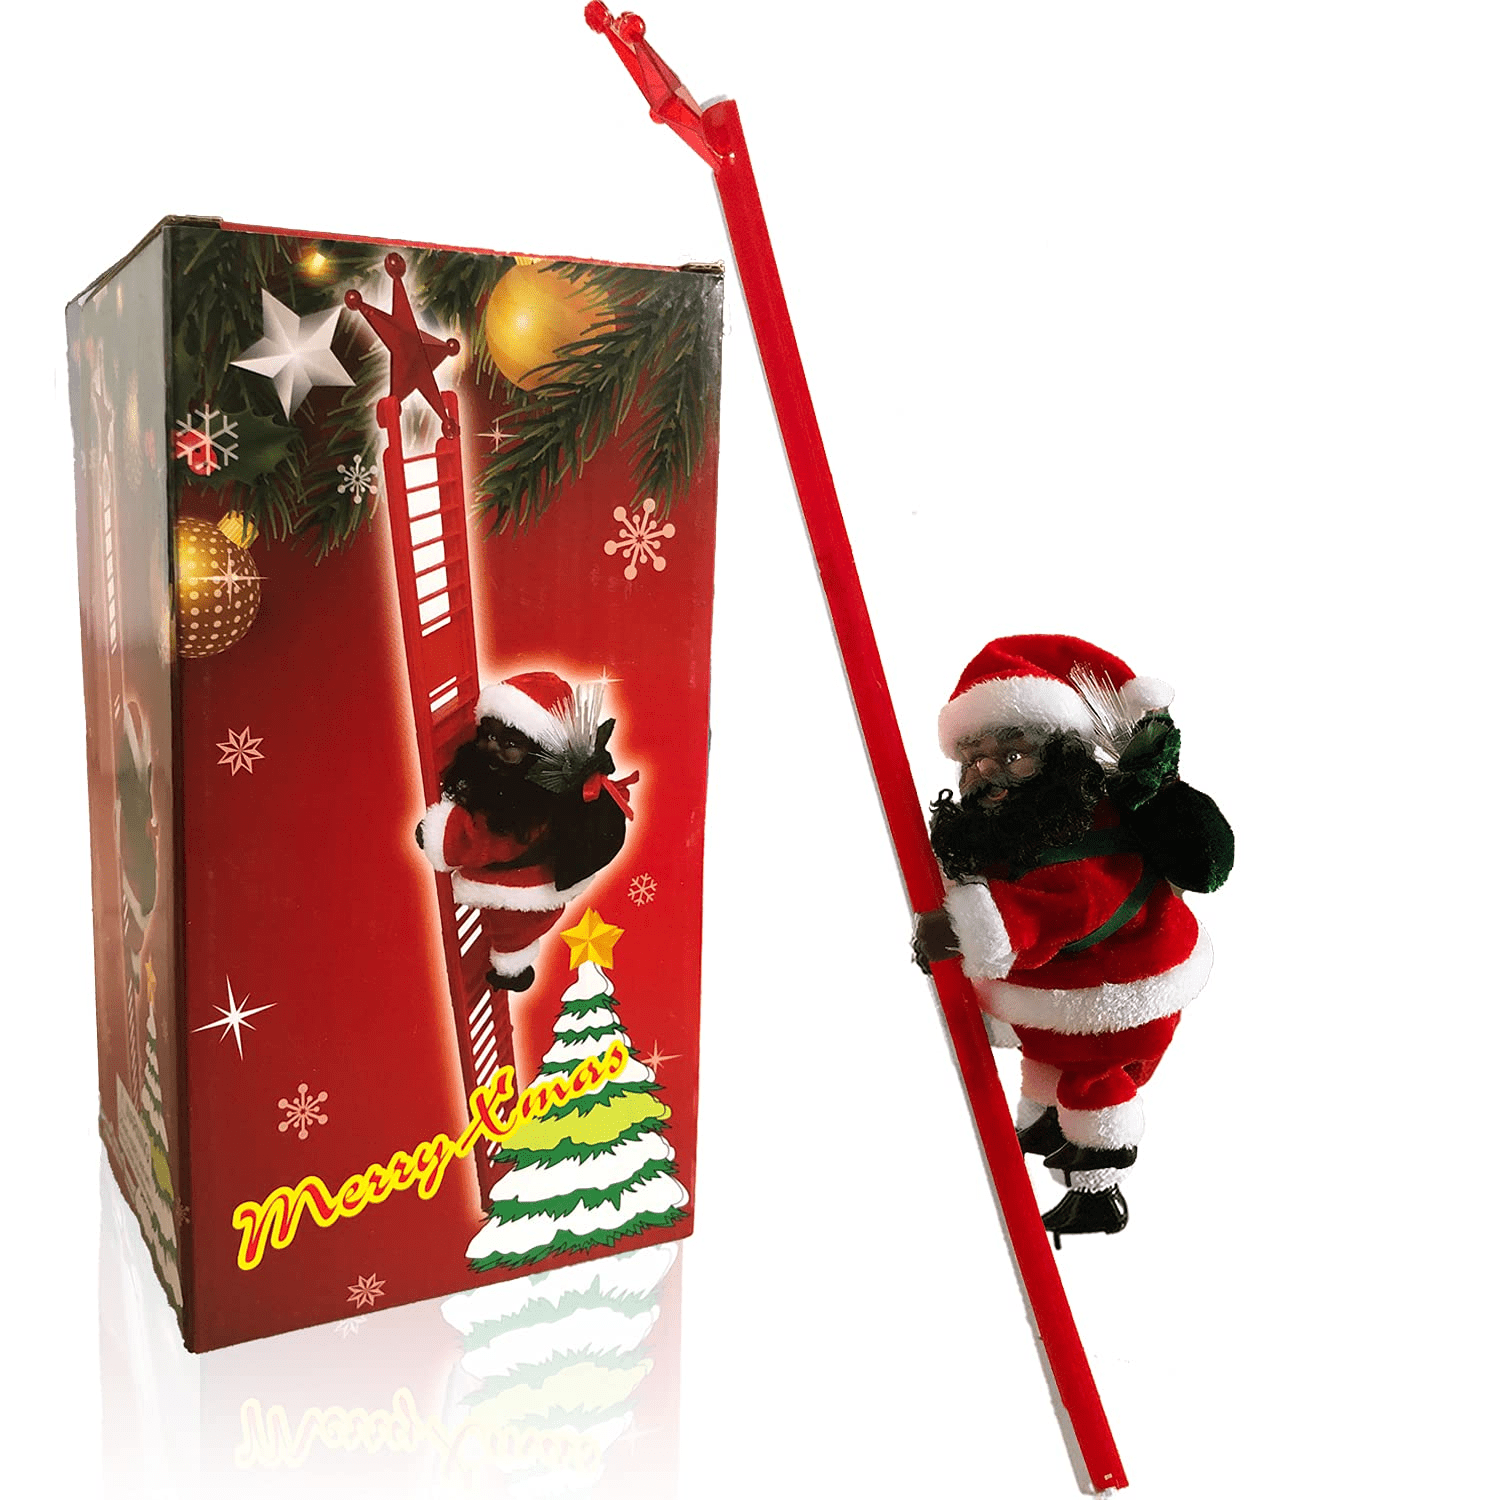 Waterproof LED Black Santa Climbing Ladder Climbing Rope Ladder With Remote  Control Indoor/Outdoor Christmas Decoration From Bian09, $19.88